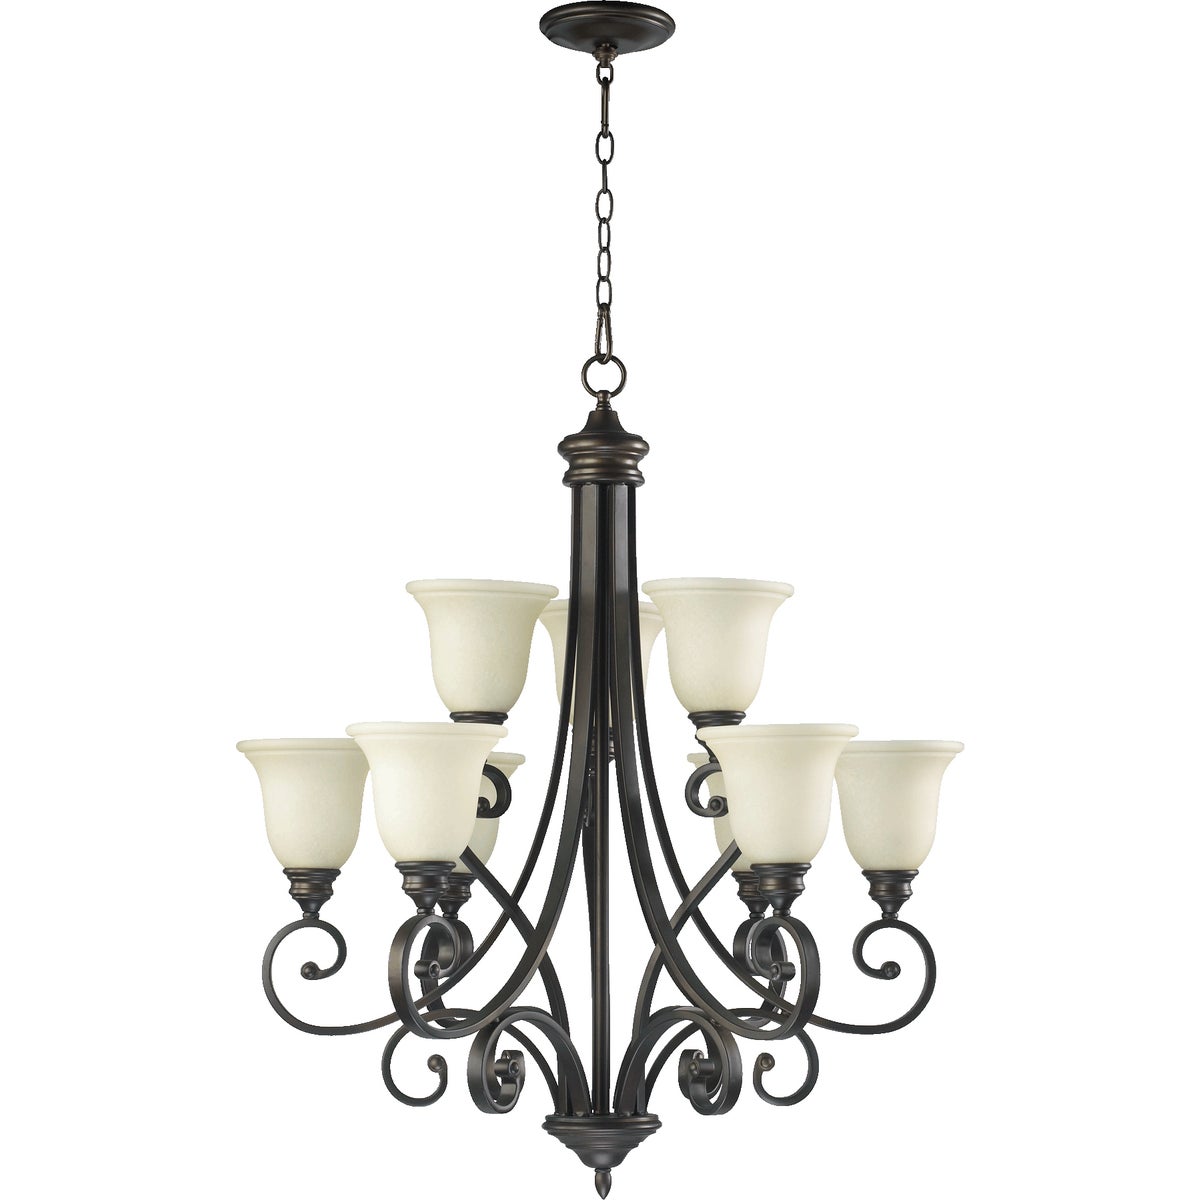 Foyer Chandelier with white glass shades, curvaceous arms, and symmetrical balance. Celebrate classic lighting design with this elegant, luxury chandelier for traditional or transitional spaces. 31"W x 36.25"H. 9 bulbs, 60W, dimmable. UL Listed, 2-year warranty.